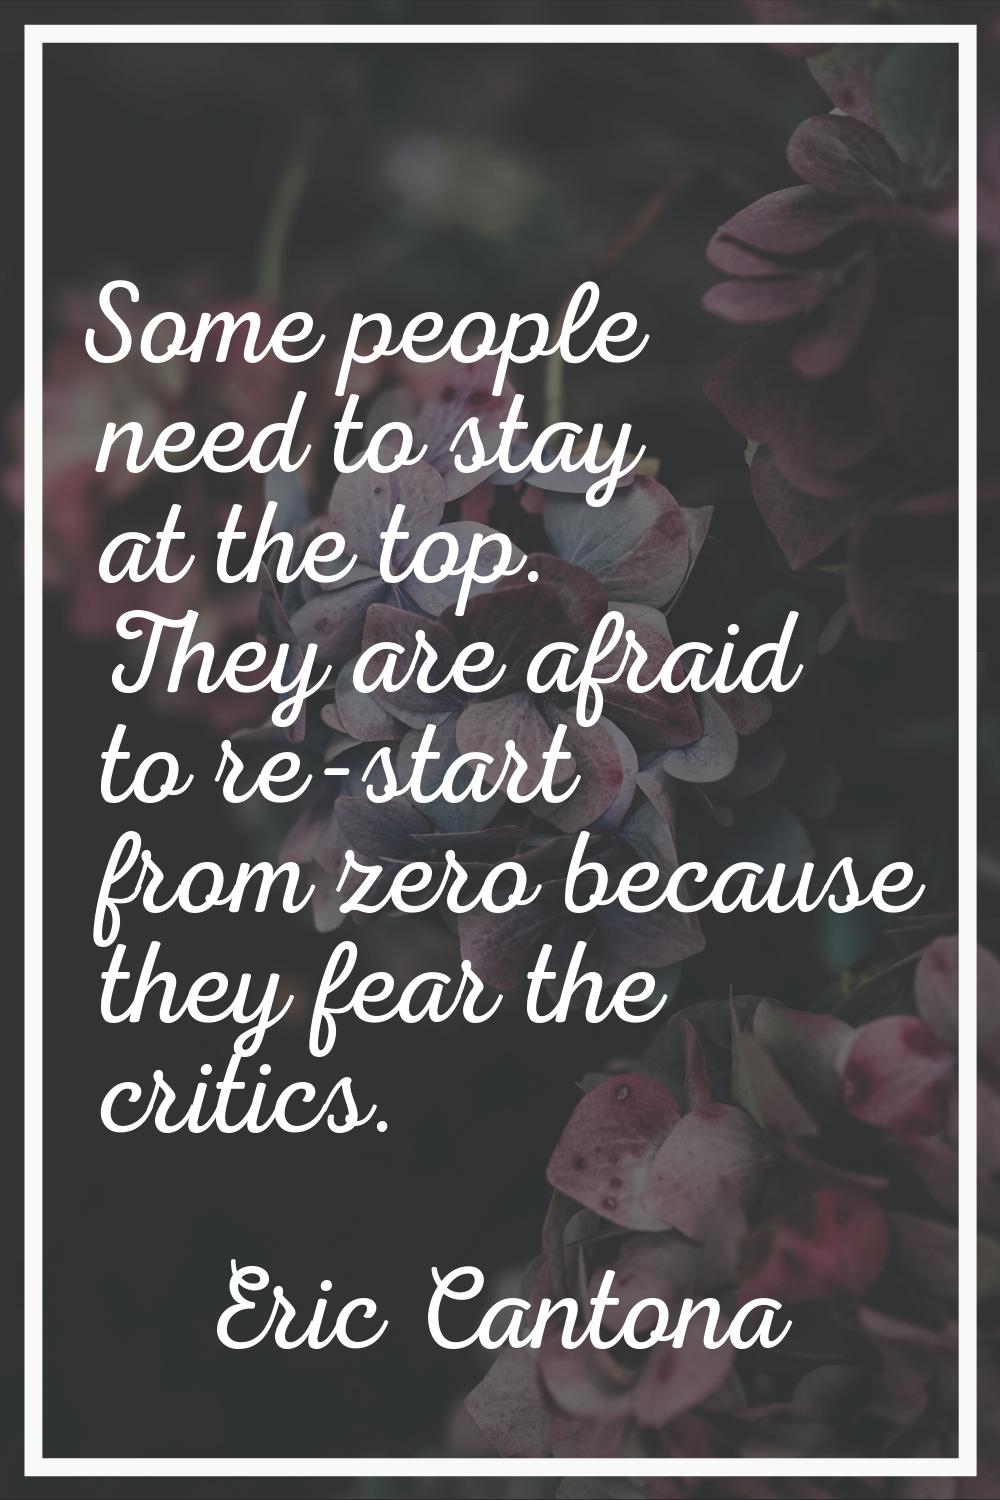 Some people need to stay at the top. They are afraid to re-start from zero because they fear the cr